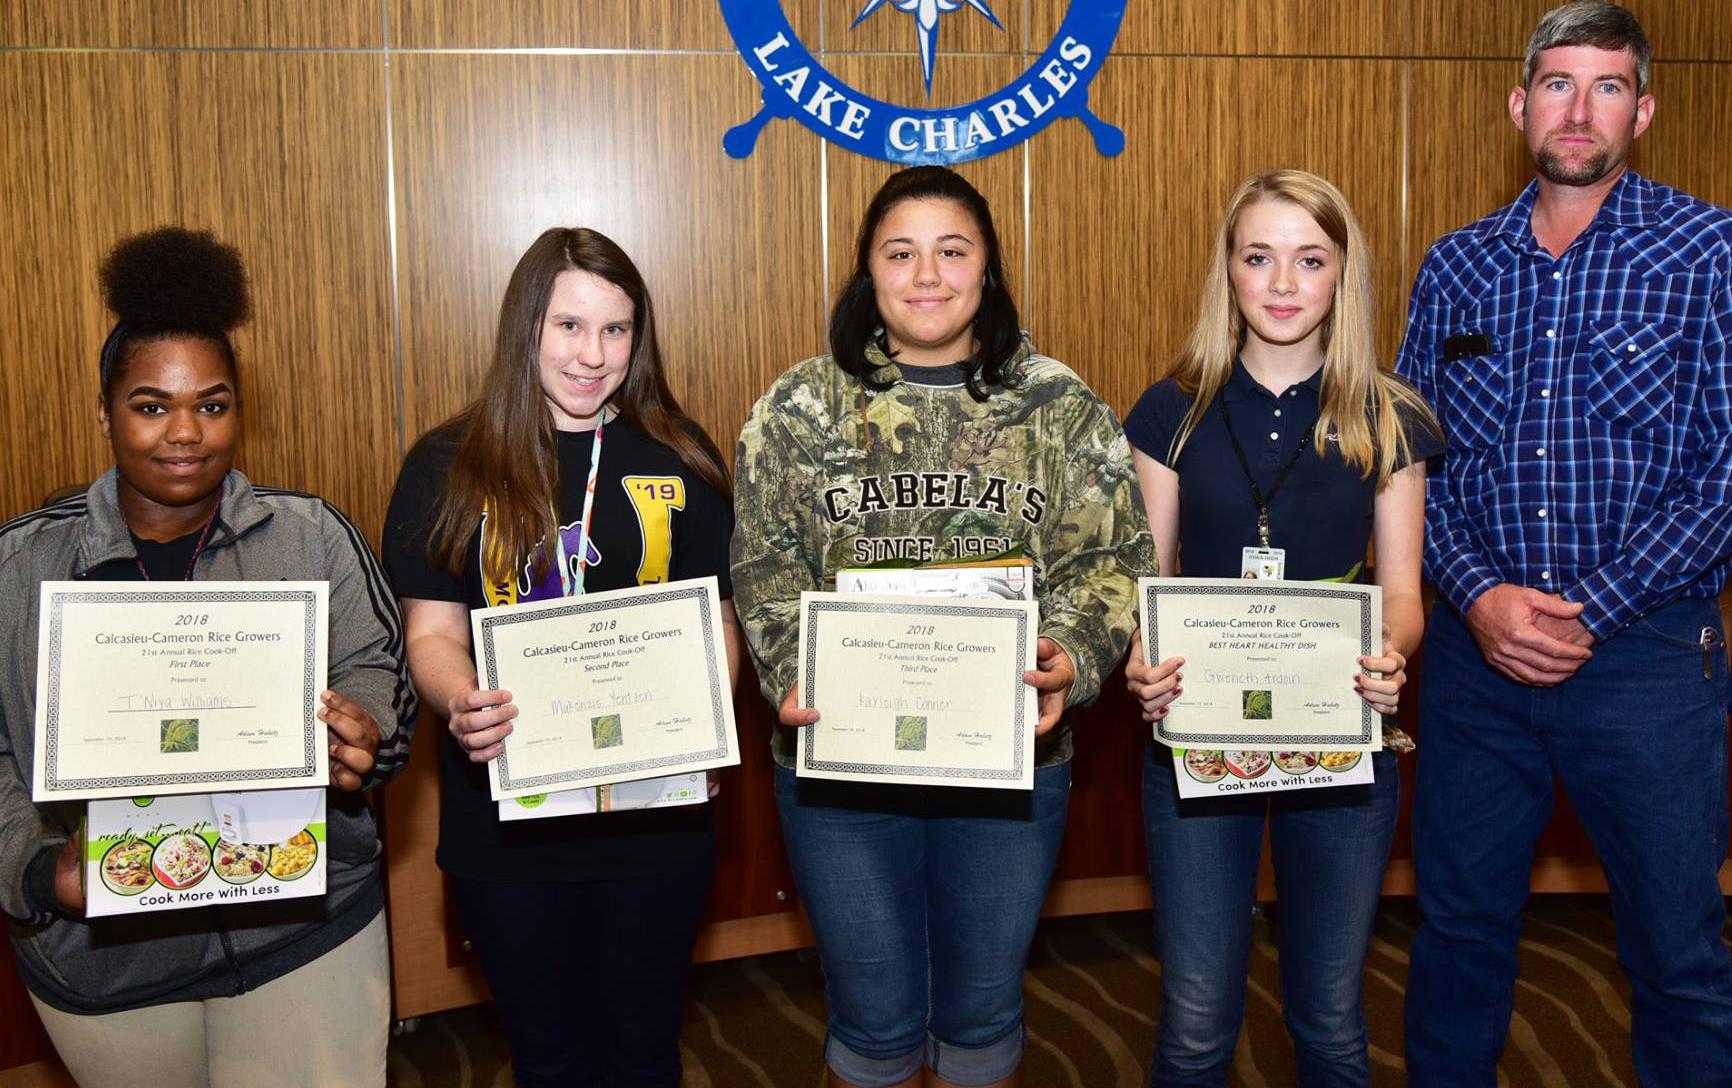 Four female students holding certificates and rice cookers stand in front of Port of Lake Charles logo, male teacher wearing blue plaid shirt stands on the far right